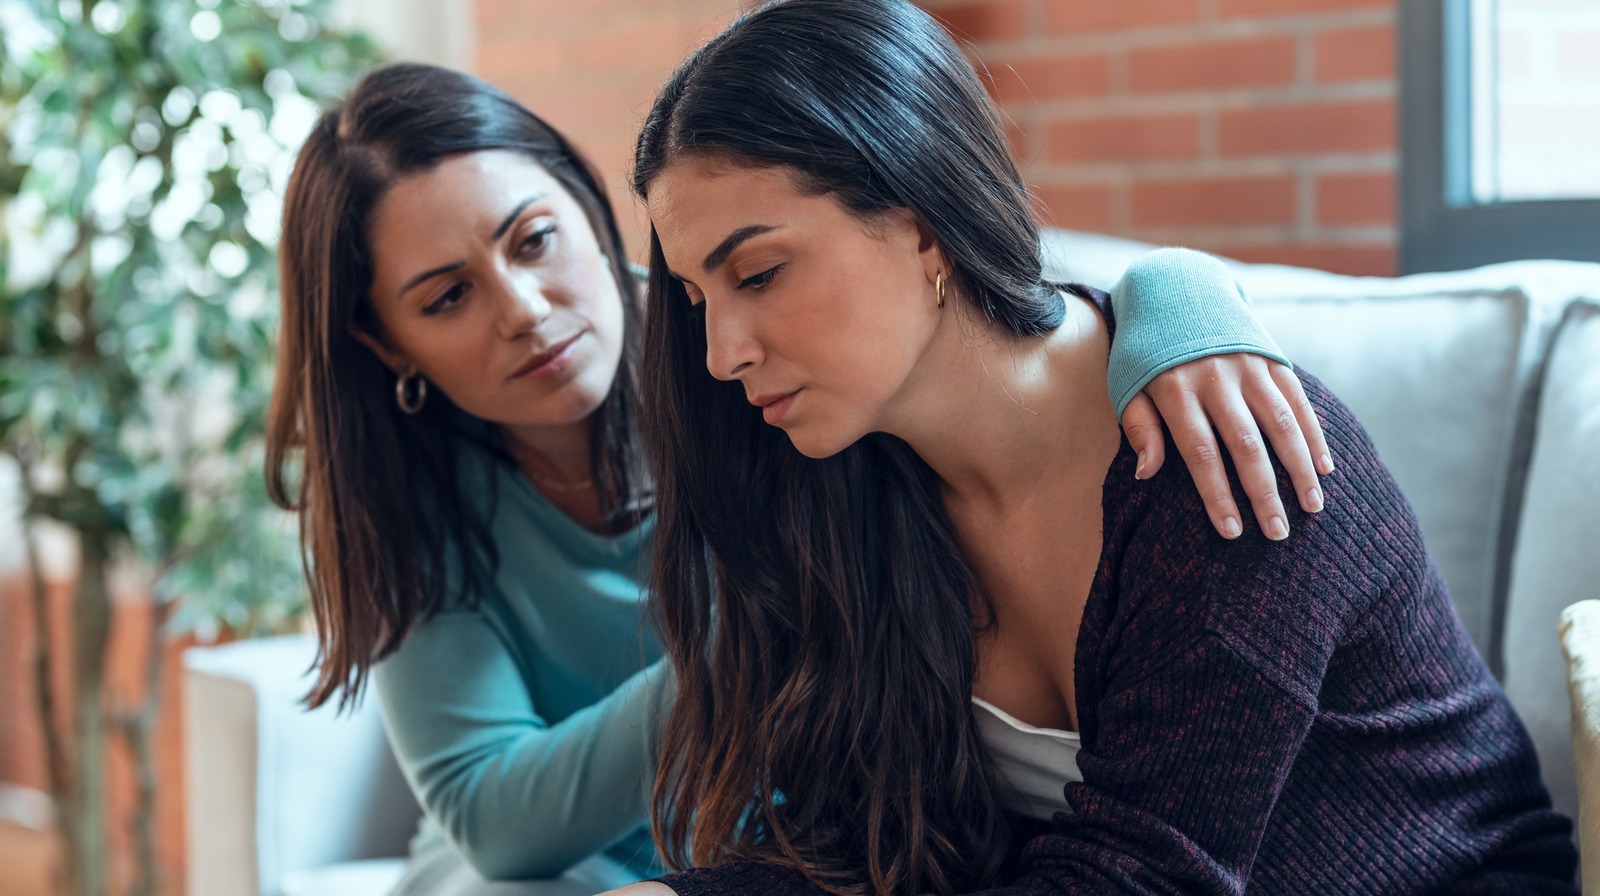 Build Stronger Connections: 5 Tips To Become More Empathetic - Mindmaven